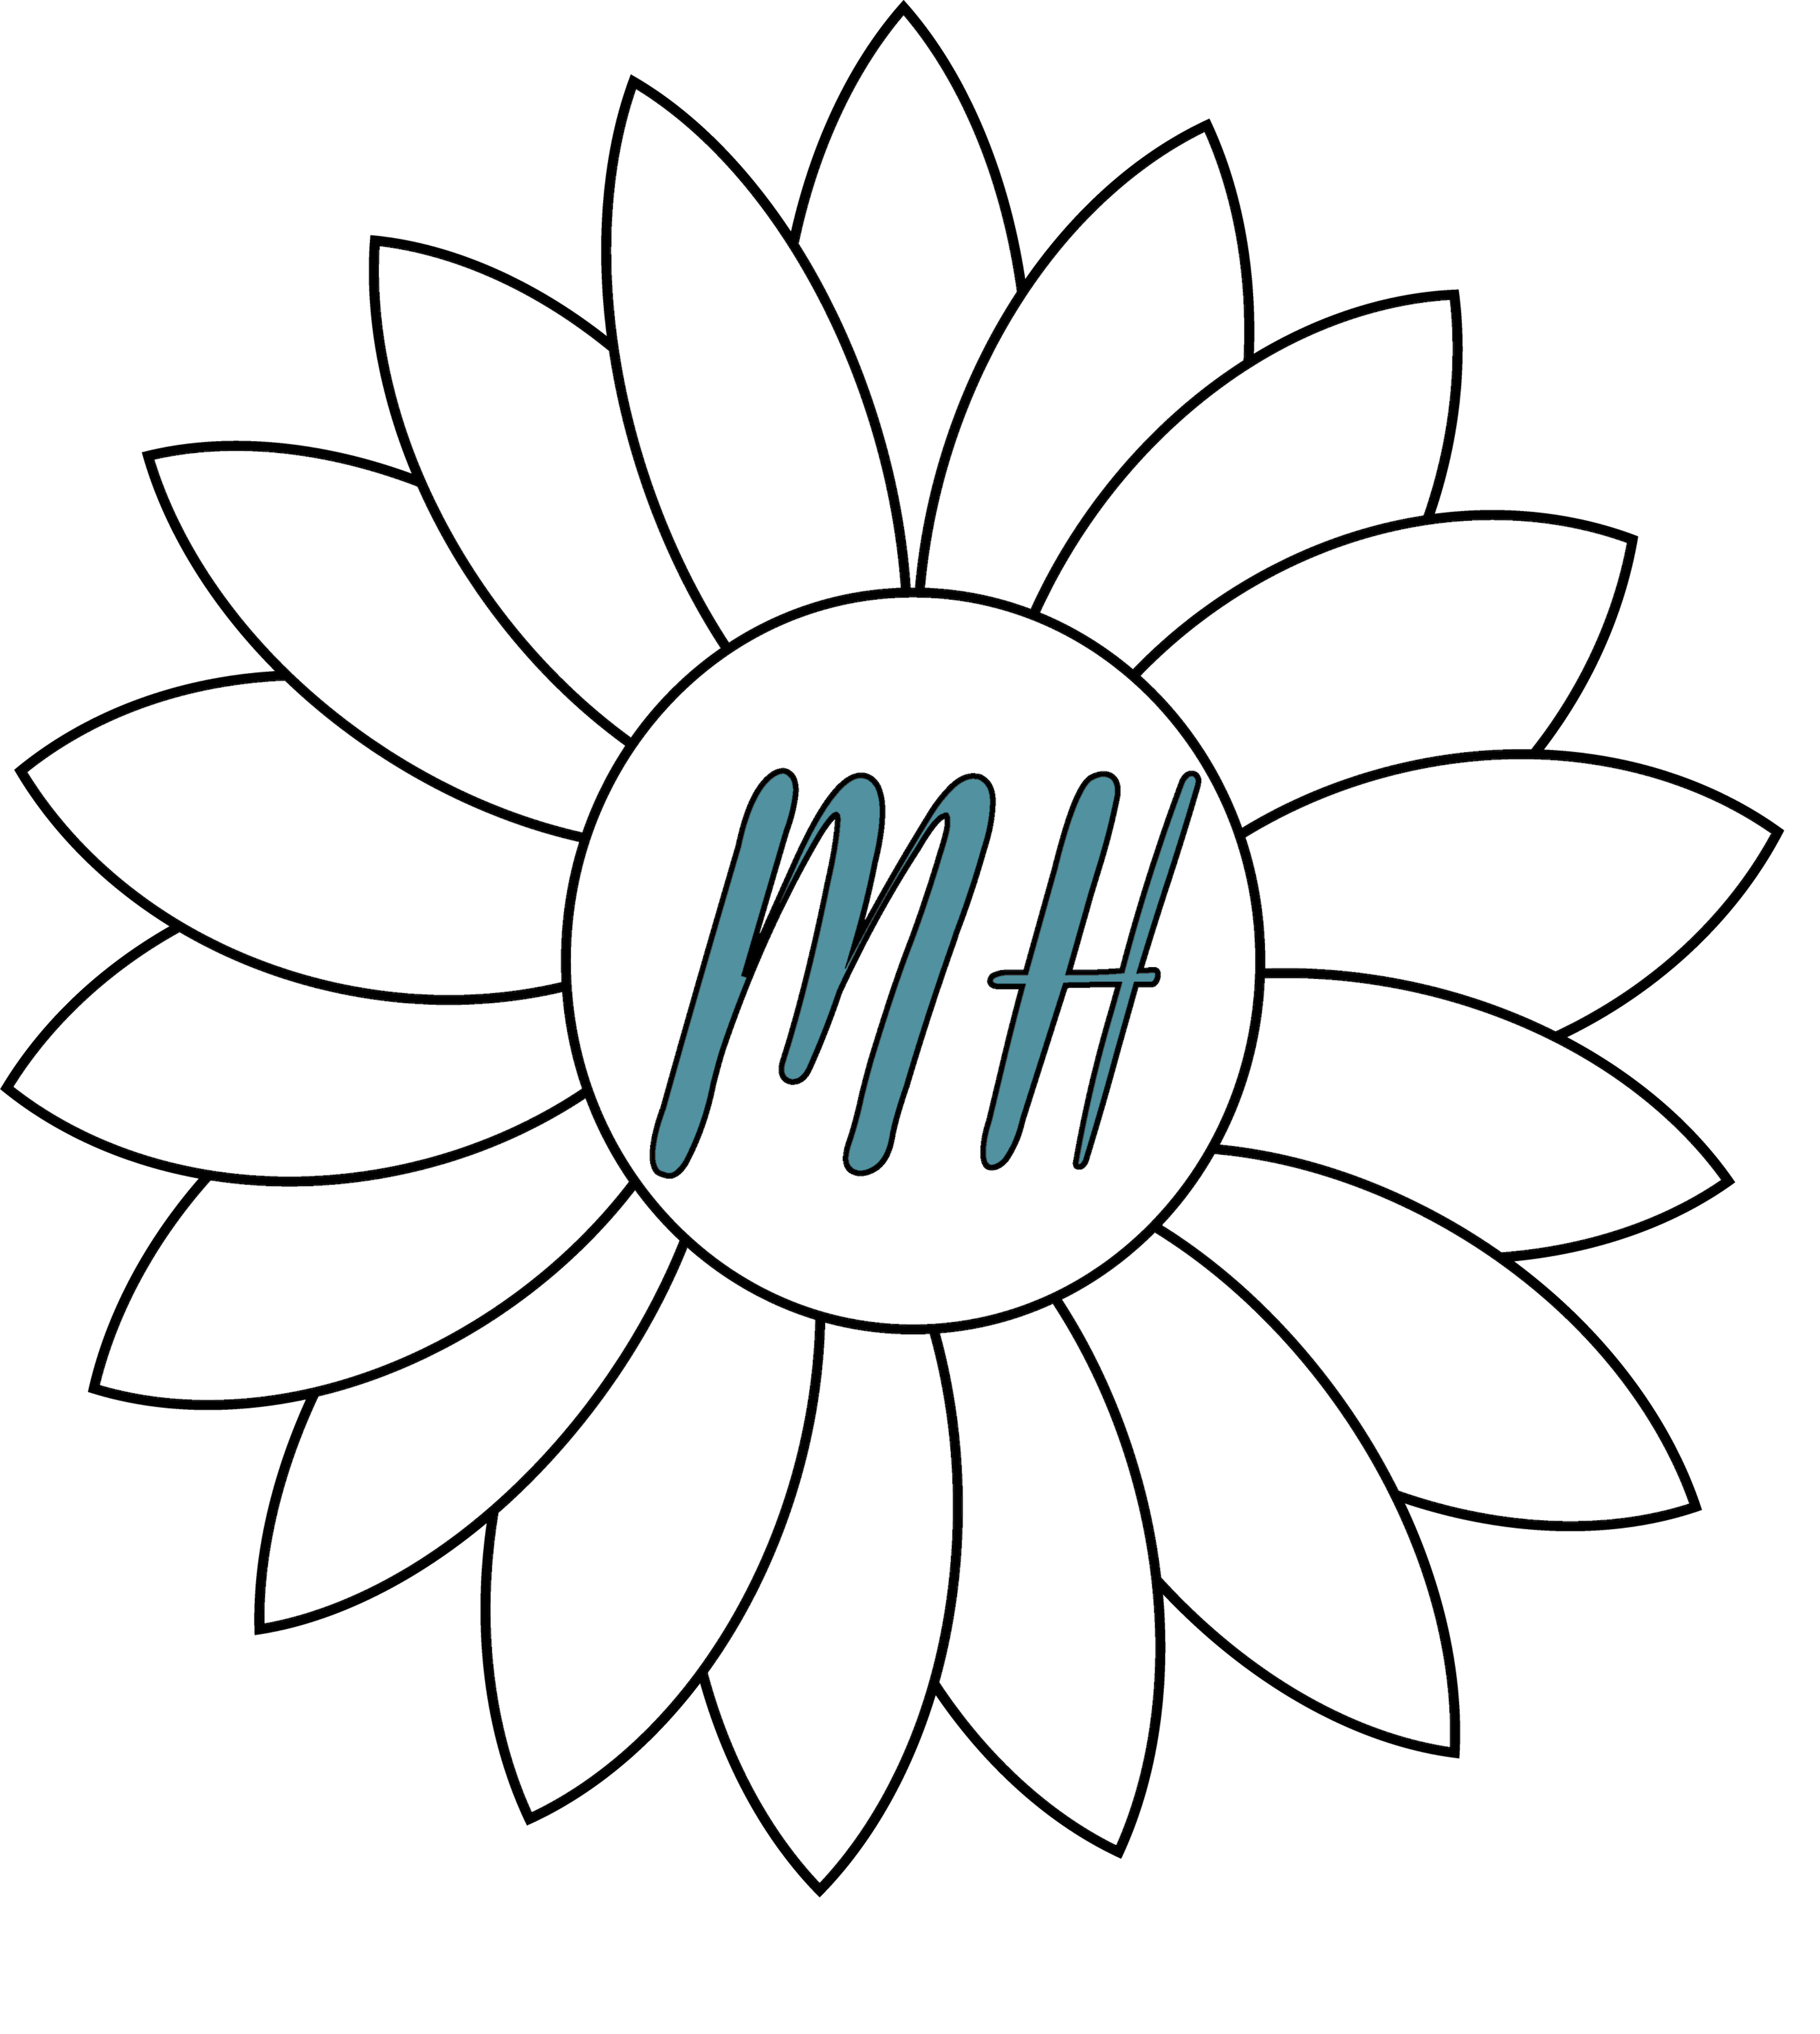 Outline of a flower with the Initials 'M H' in the center